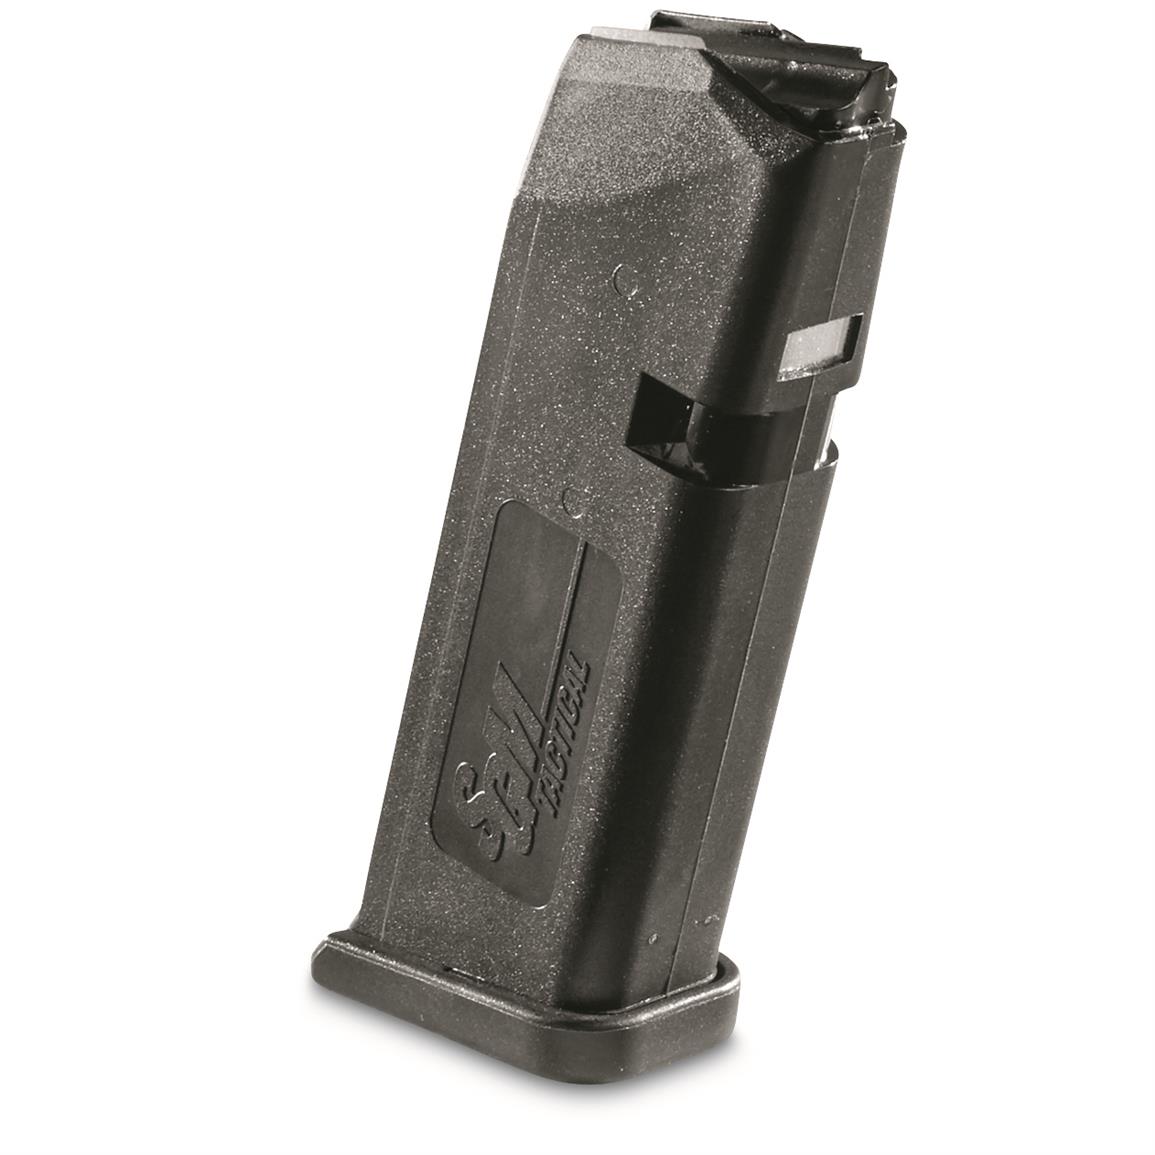 SGM Tactical, Glock 19 Magazine, 9mm, 15 Rounds